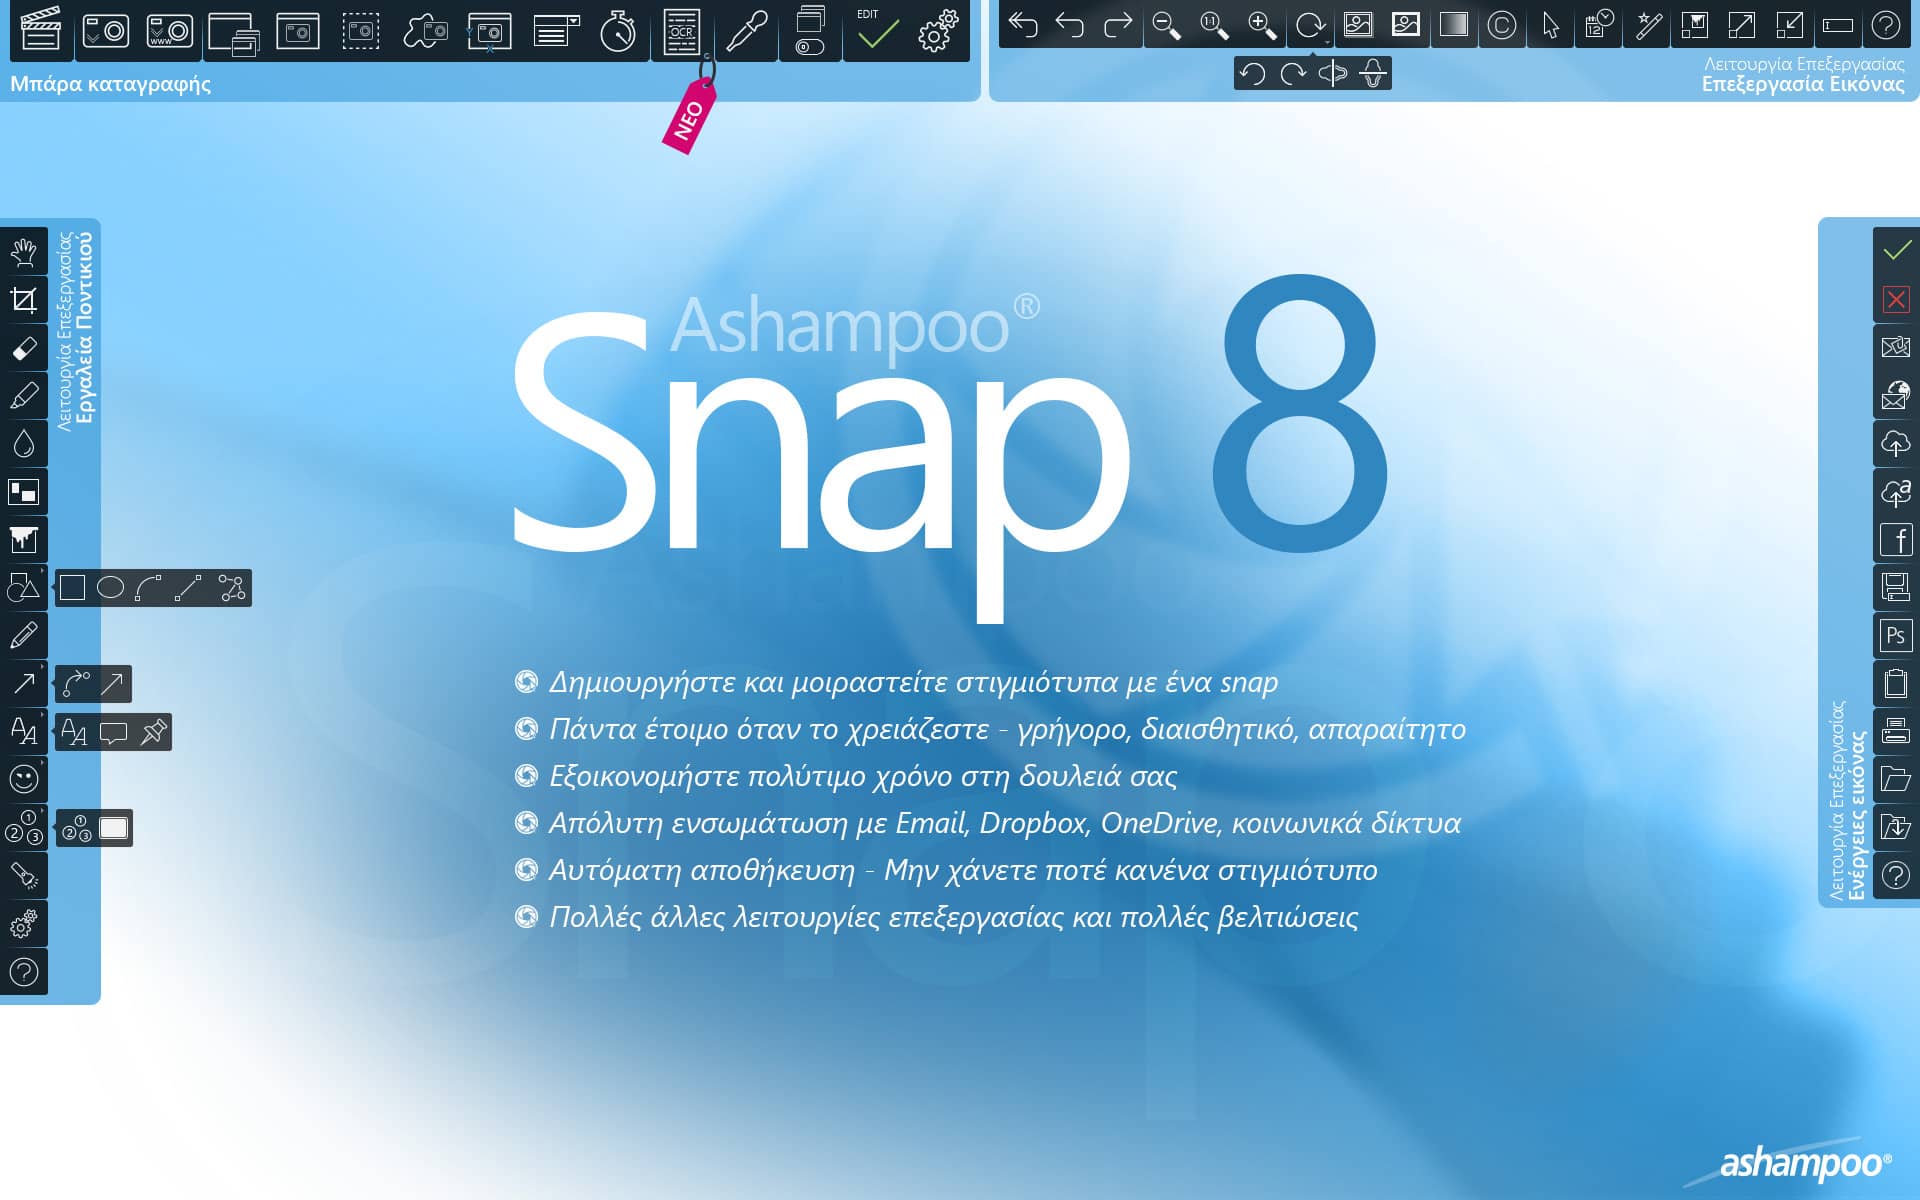 scr_ashampoo_snap_8_overview_functions_el